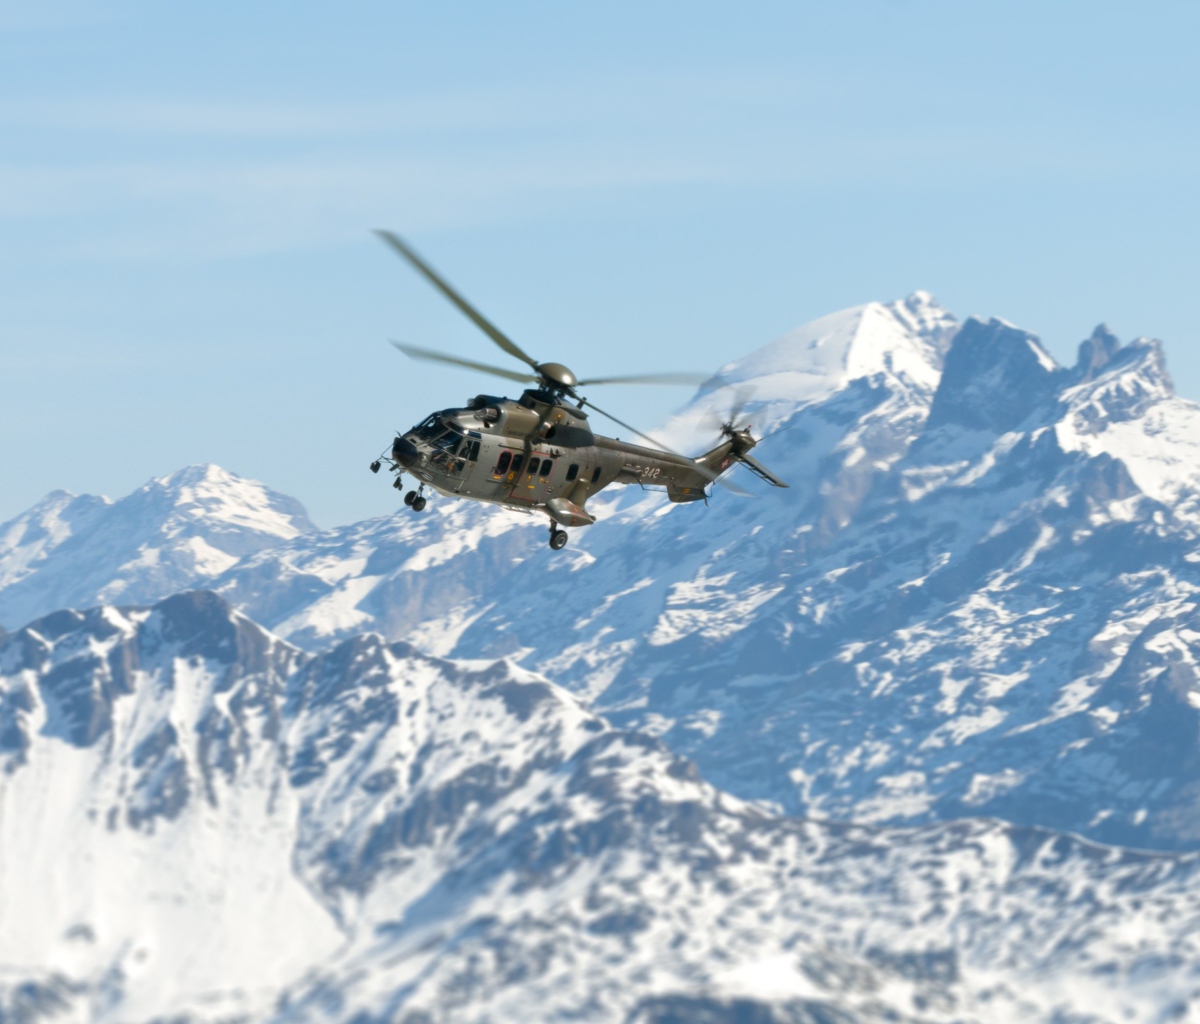 Обои Helicopter Over Snowy Mountains 1200x1024